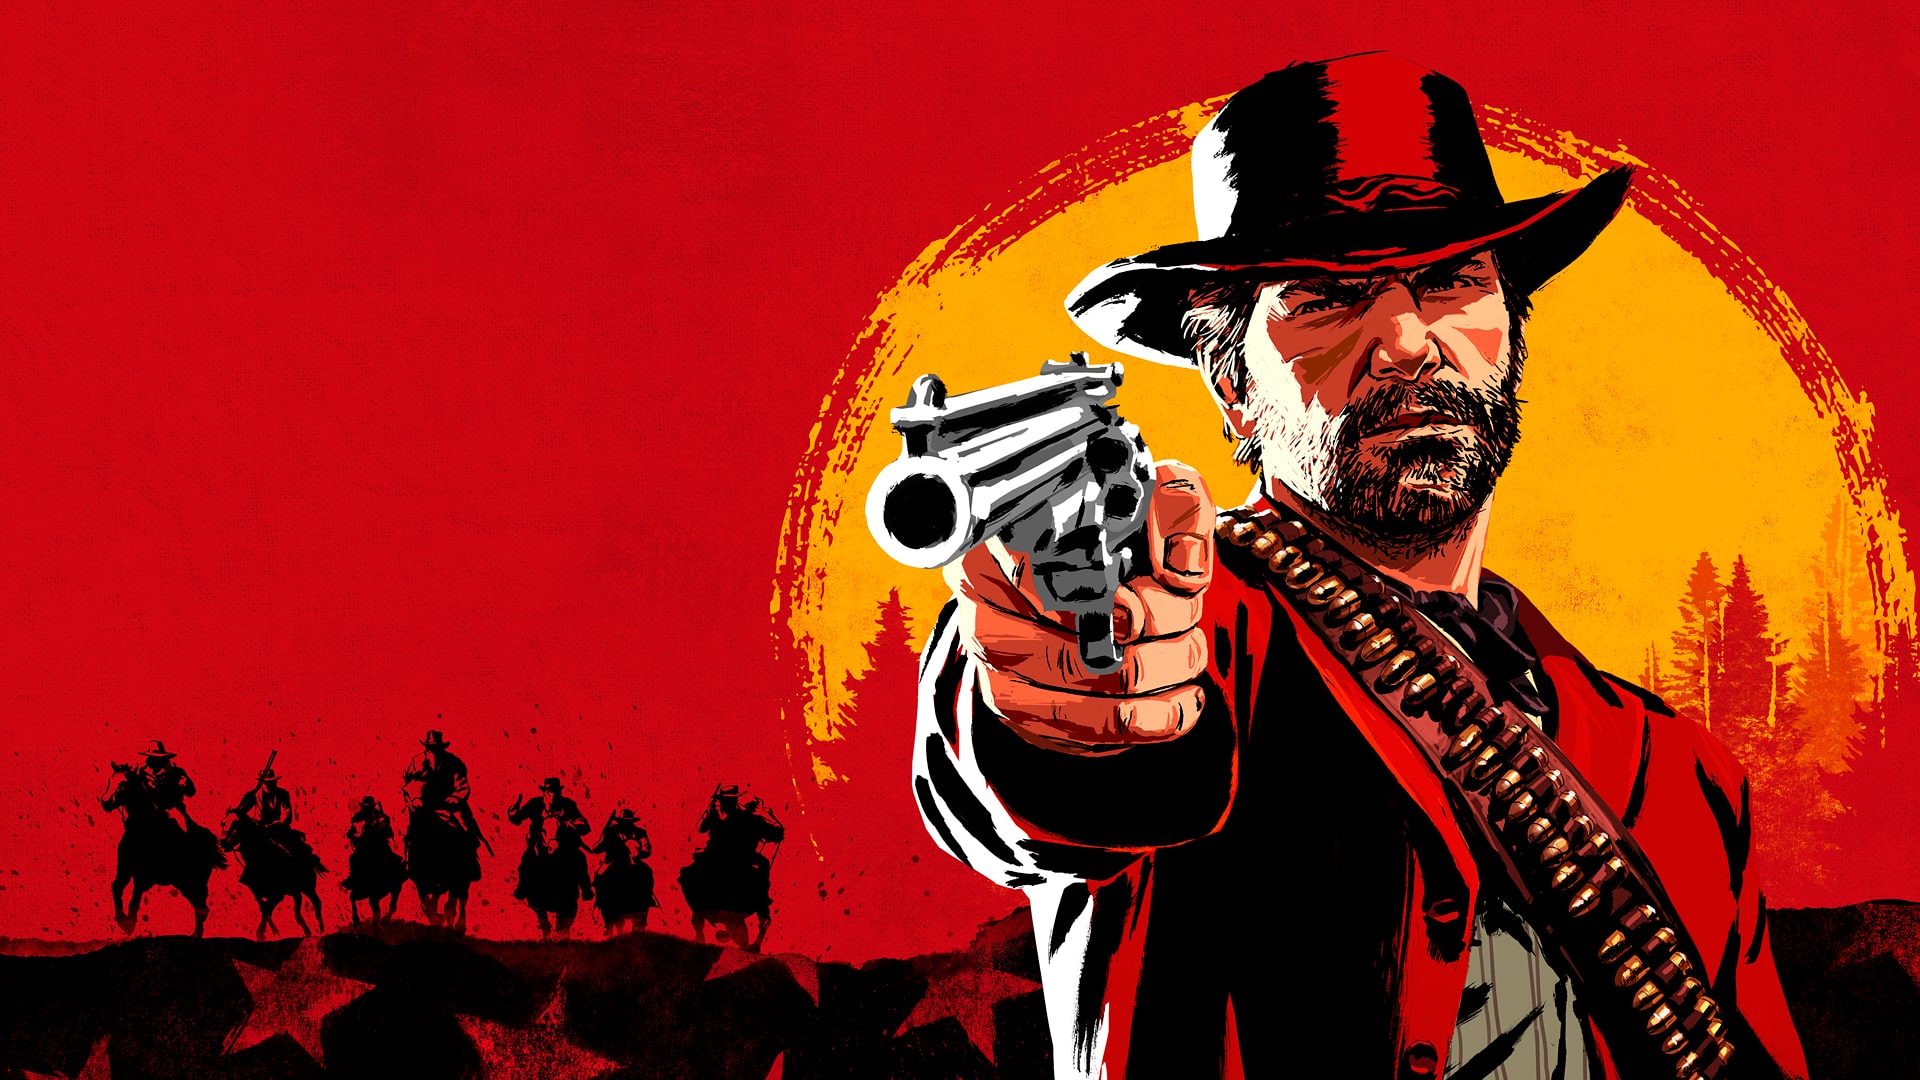 price of red dead redemption 2 ps4